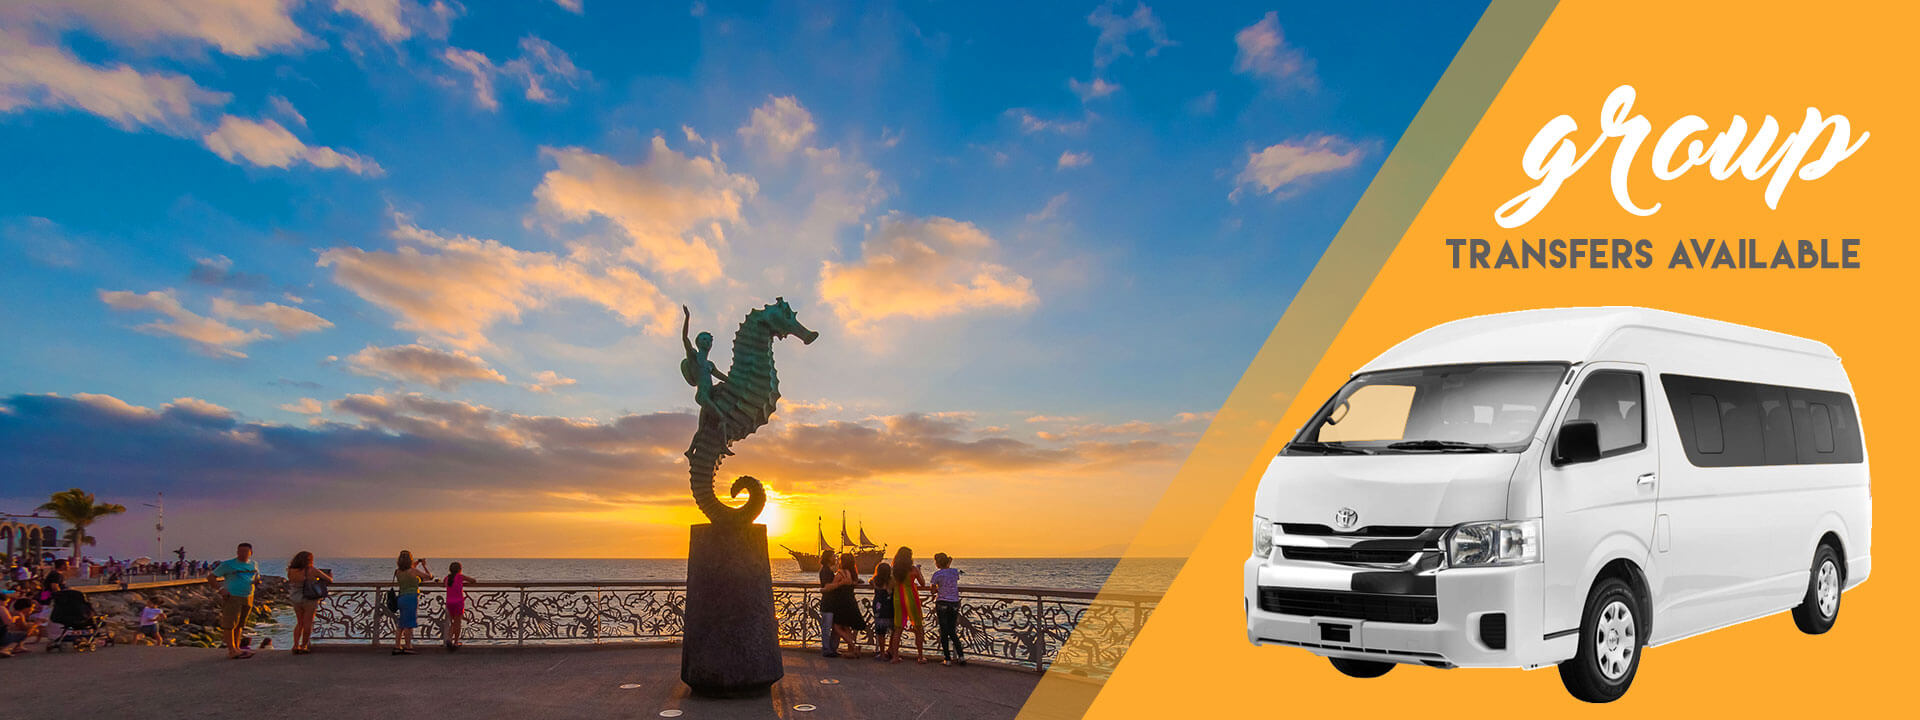 Book your private transfers with Puerto Vallarta Airport Transportation.